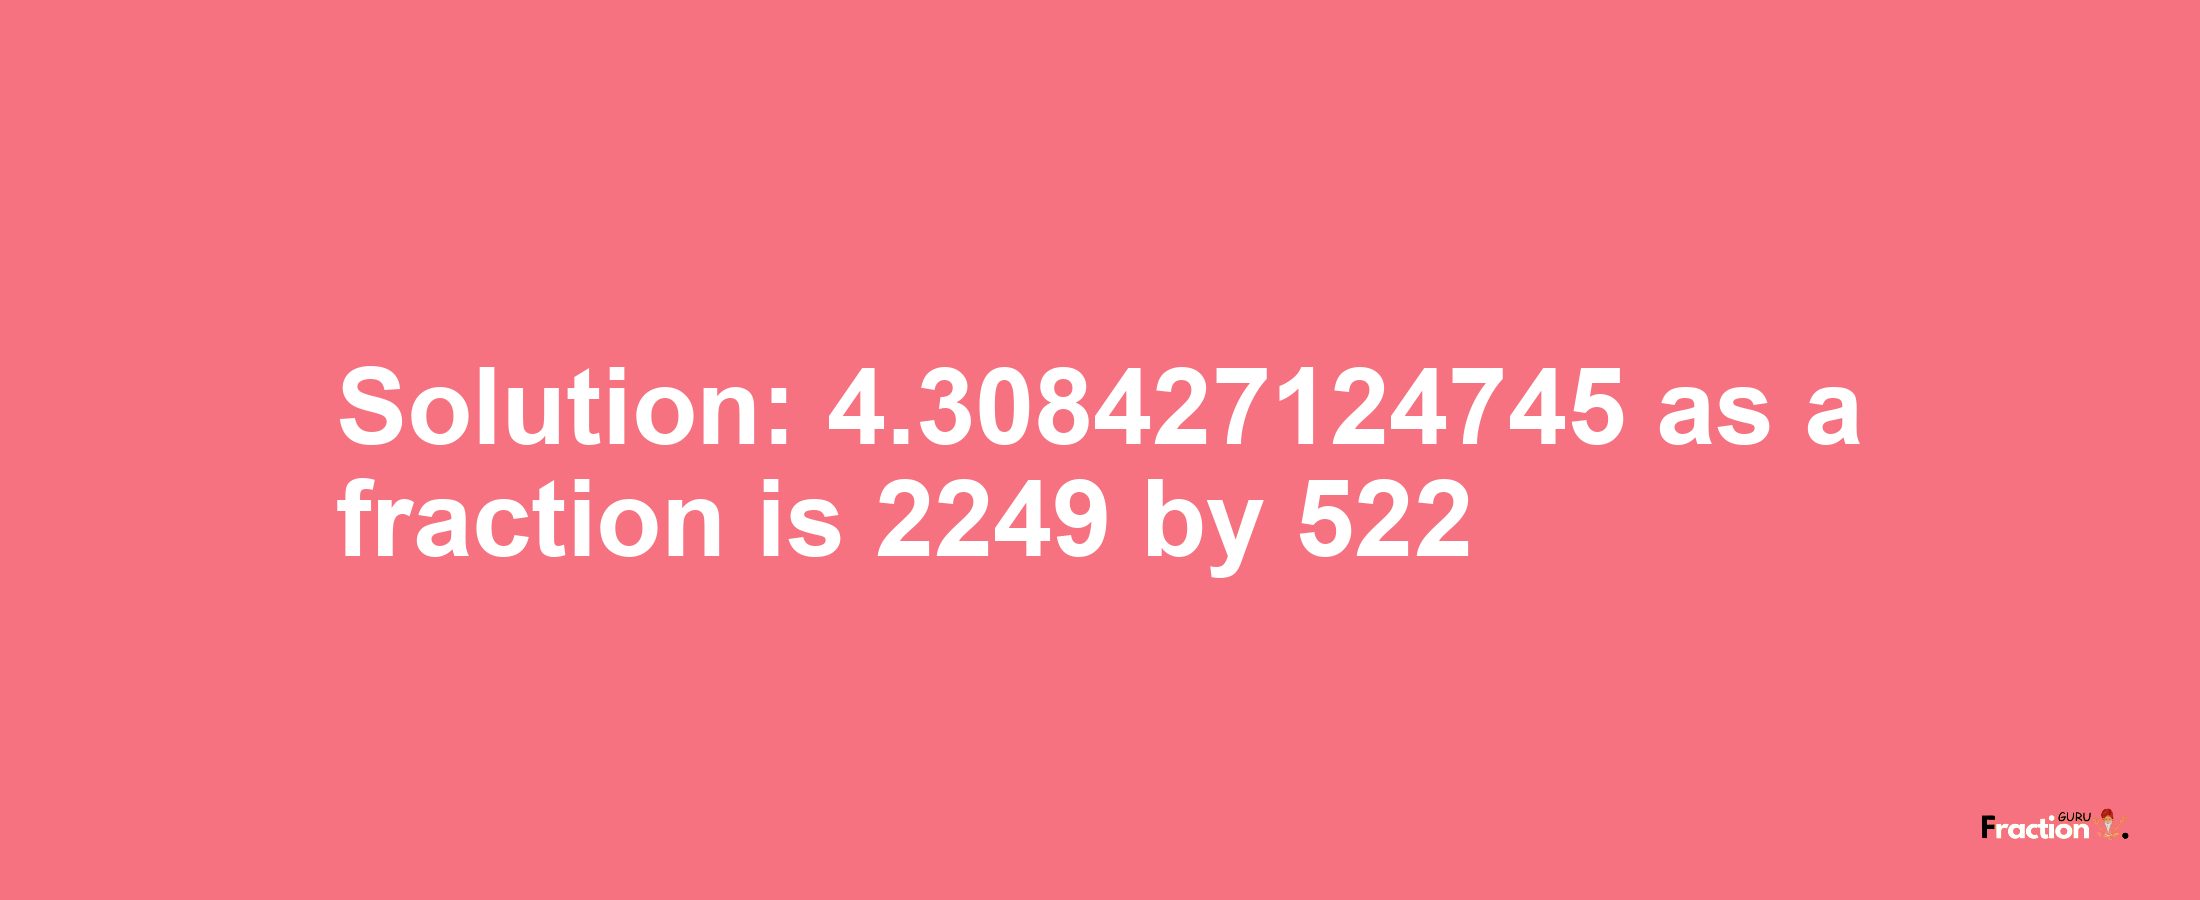 Solution:4.308427124745 as a fraction is 2249/522